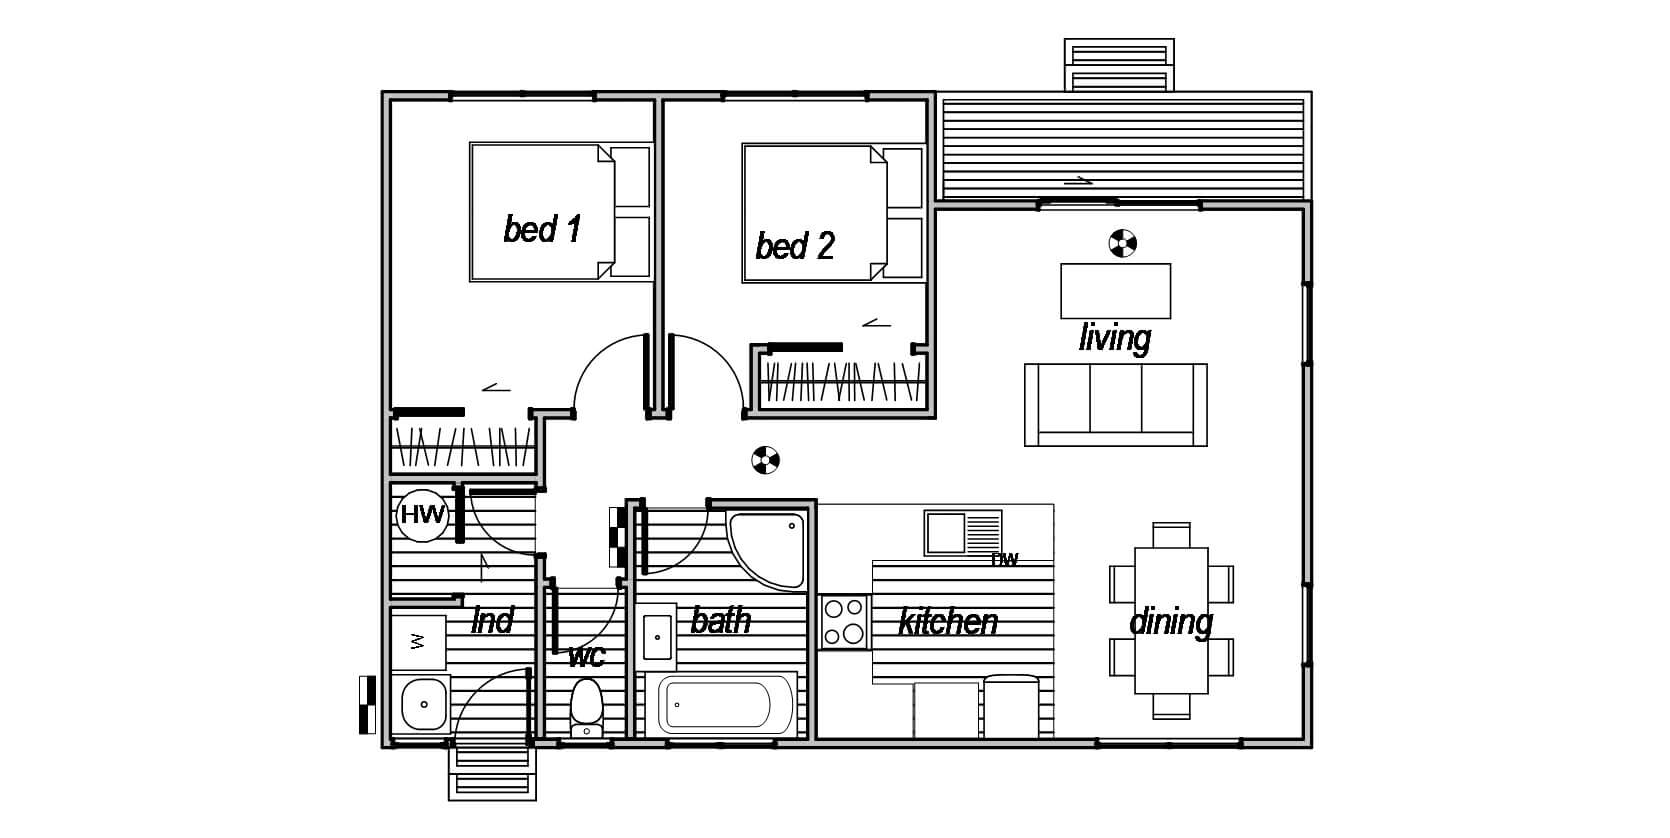 Floor Plan for 2 bedroom tiny house